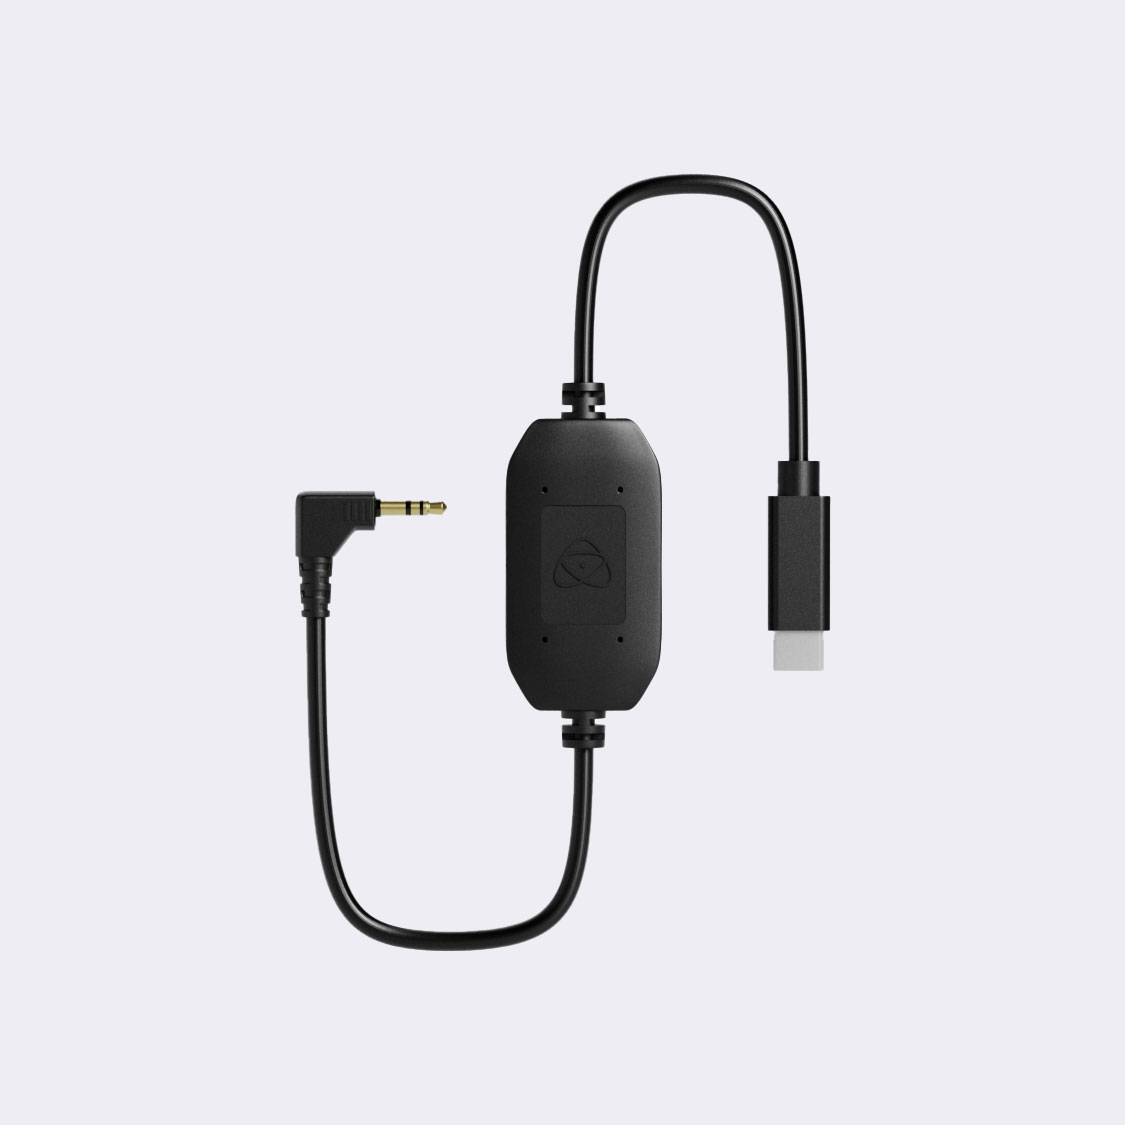 USB-C to Serial Calibration Cable with Control